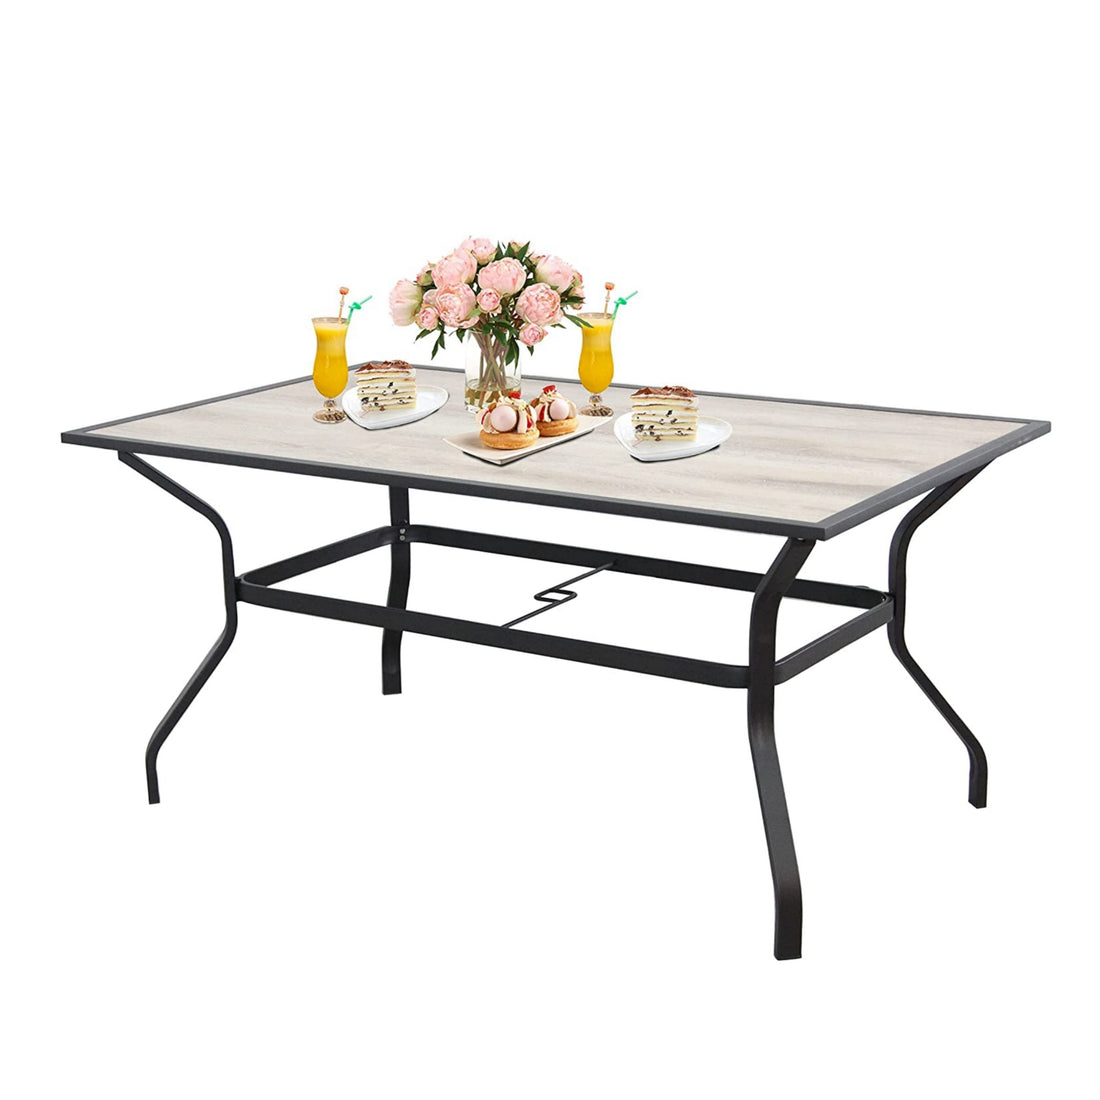 60" X 37" Patio Dining Table, Outdoor Large -